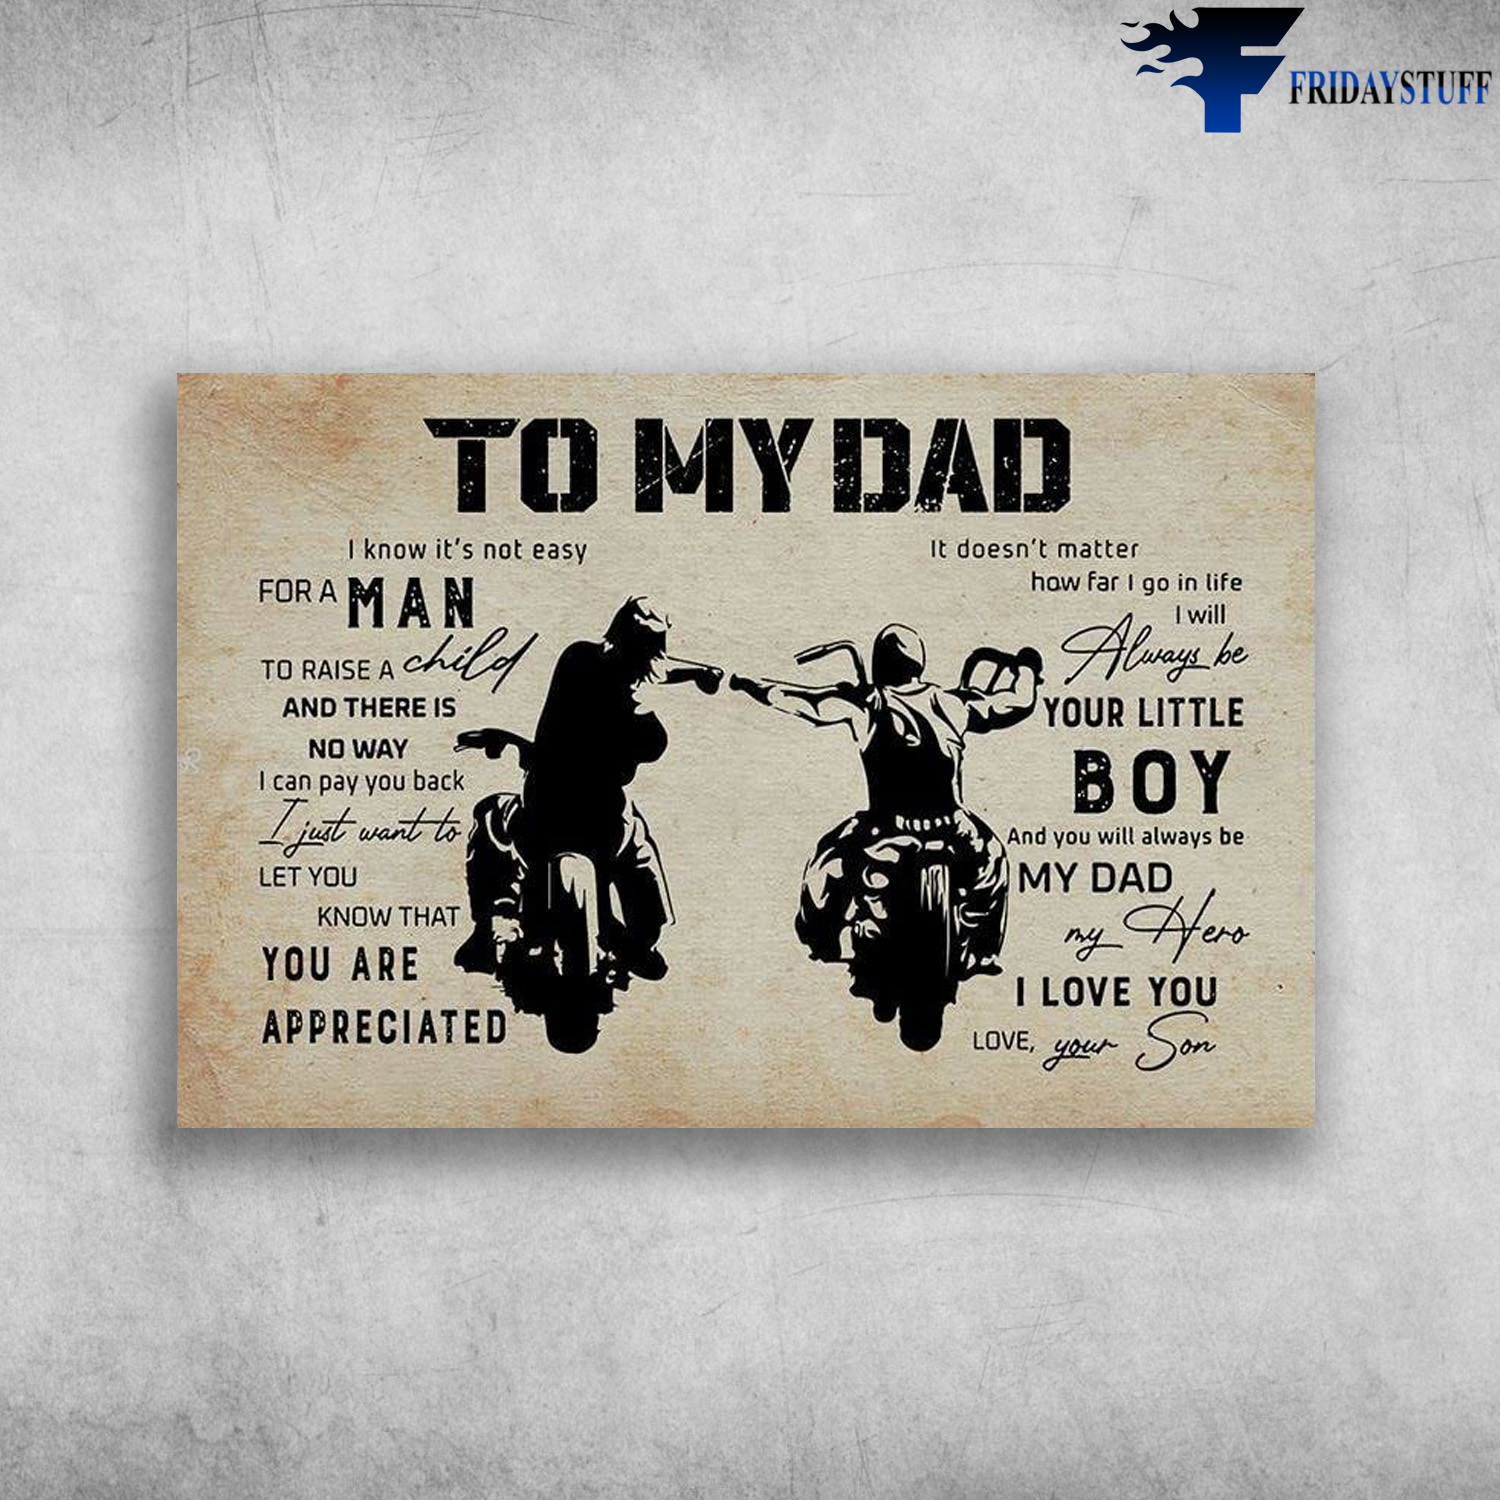 Dad And Son Motorcycle - To My Dad, I Know It’s Not Easy For A Man, To Raise A Child, And There Is No Way, I Can Pay You Back, I Just Want To Let You Know That, You Are Appreciated, I Doesn’t Matter How Far I Go In Life